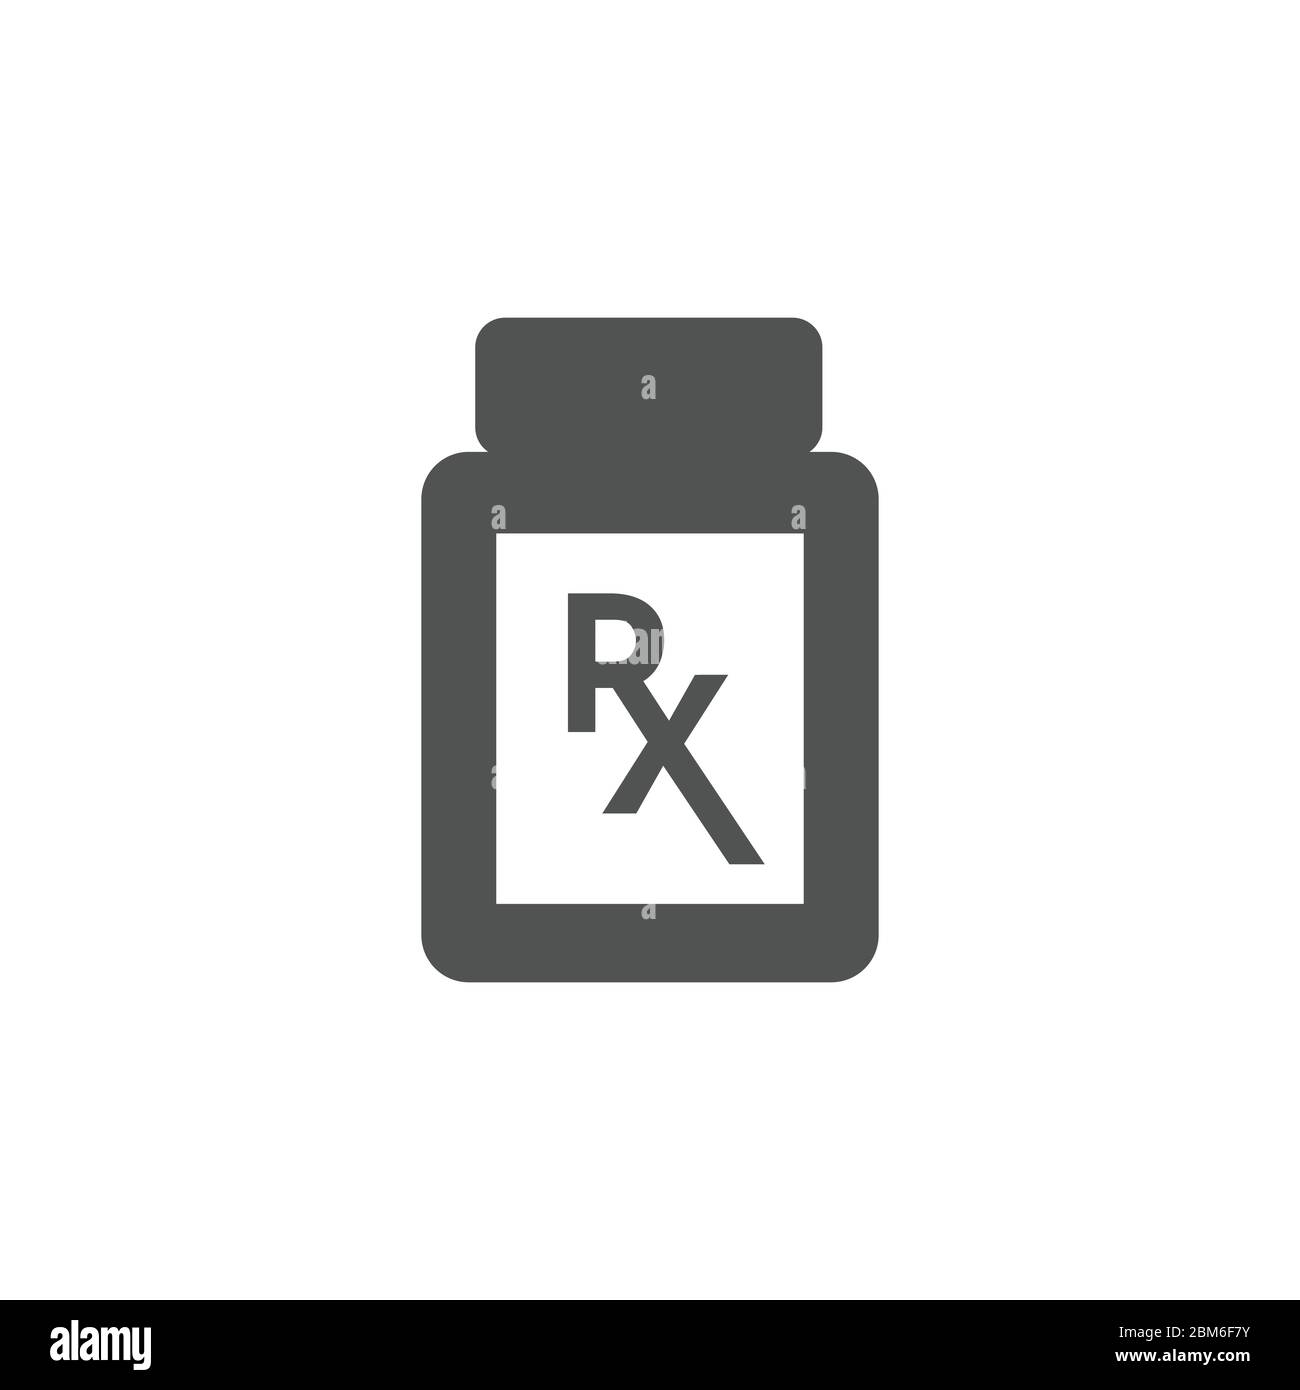 Pharmacy and Prescription Icon with pharmaceutical image depicting pharmacy icon Stock Vector